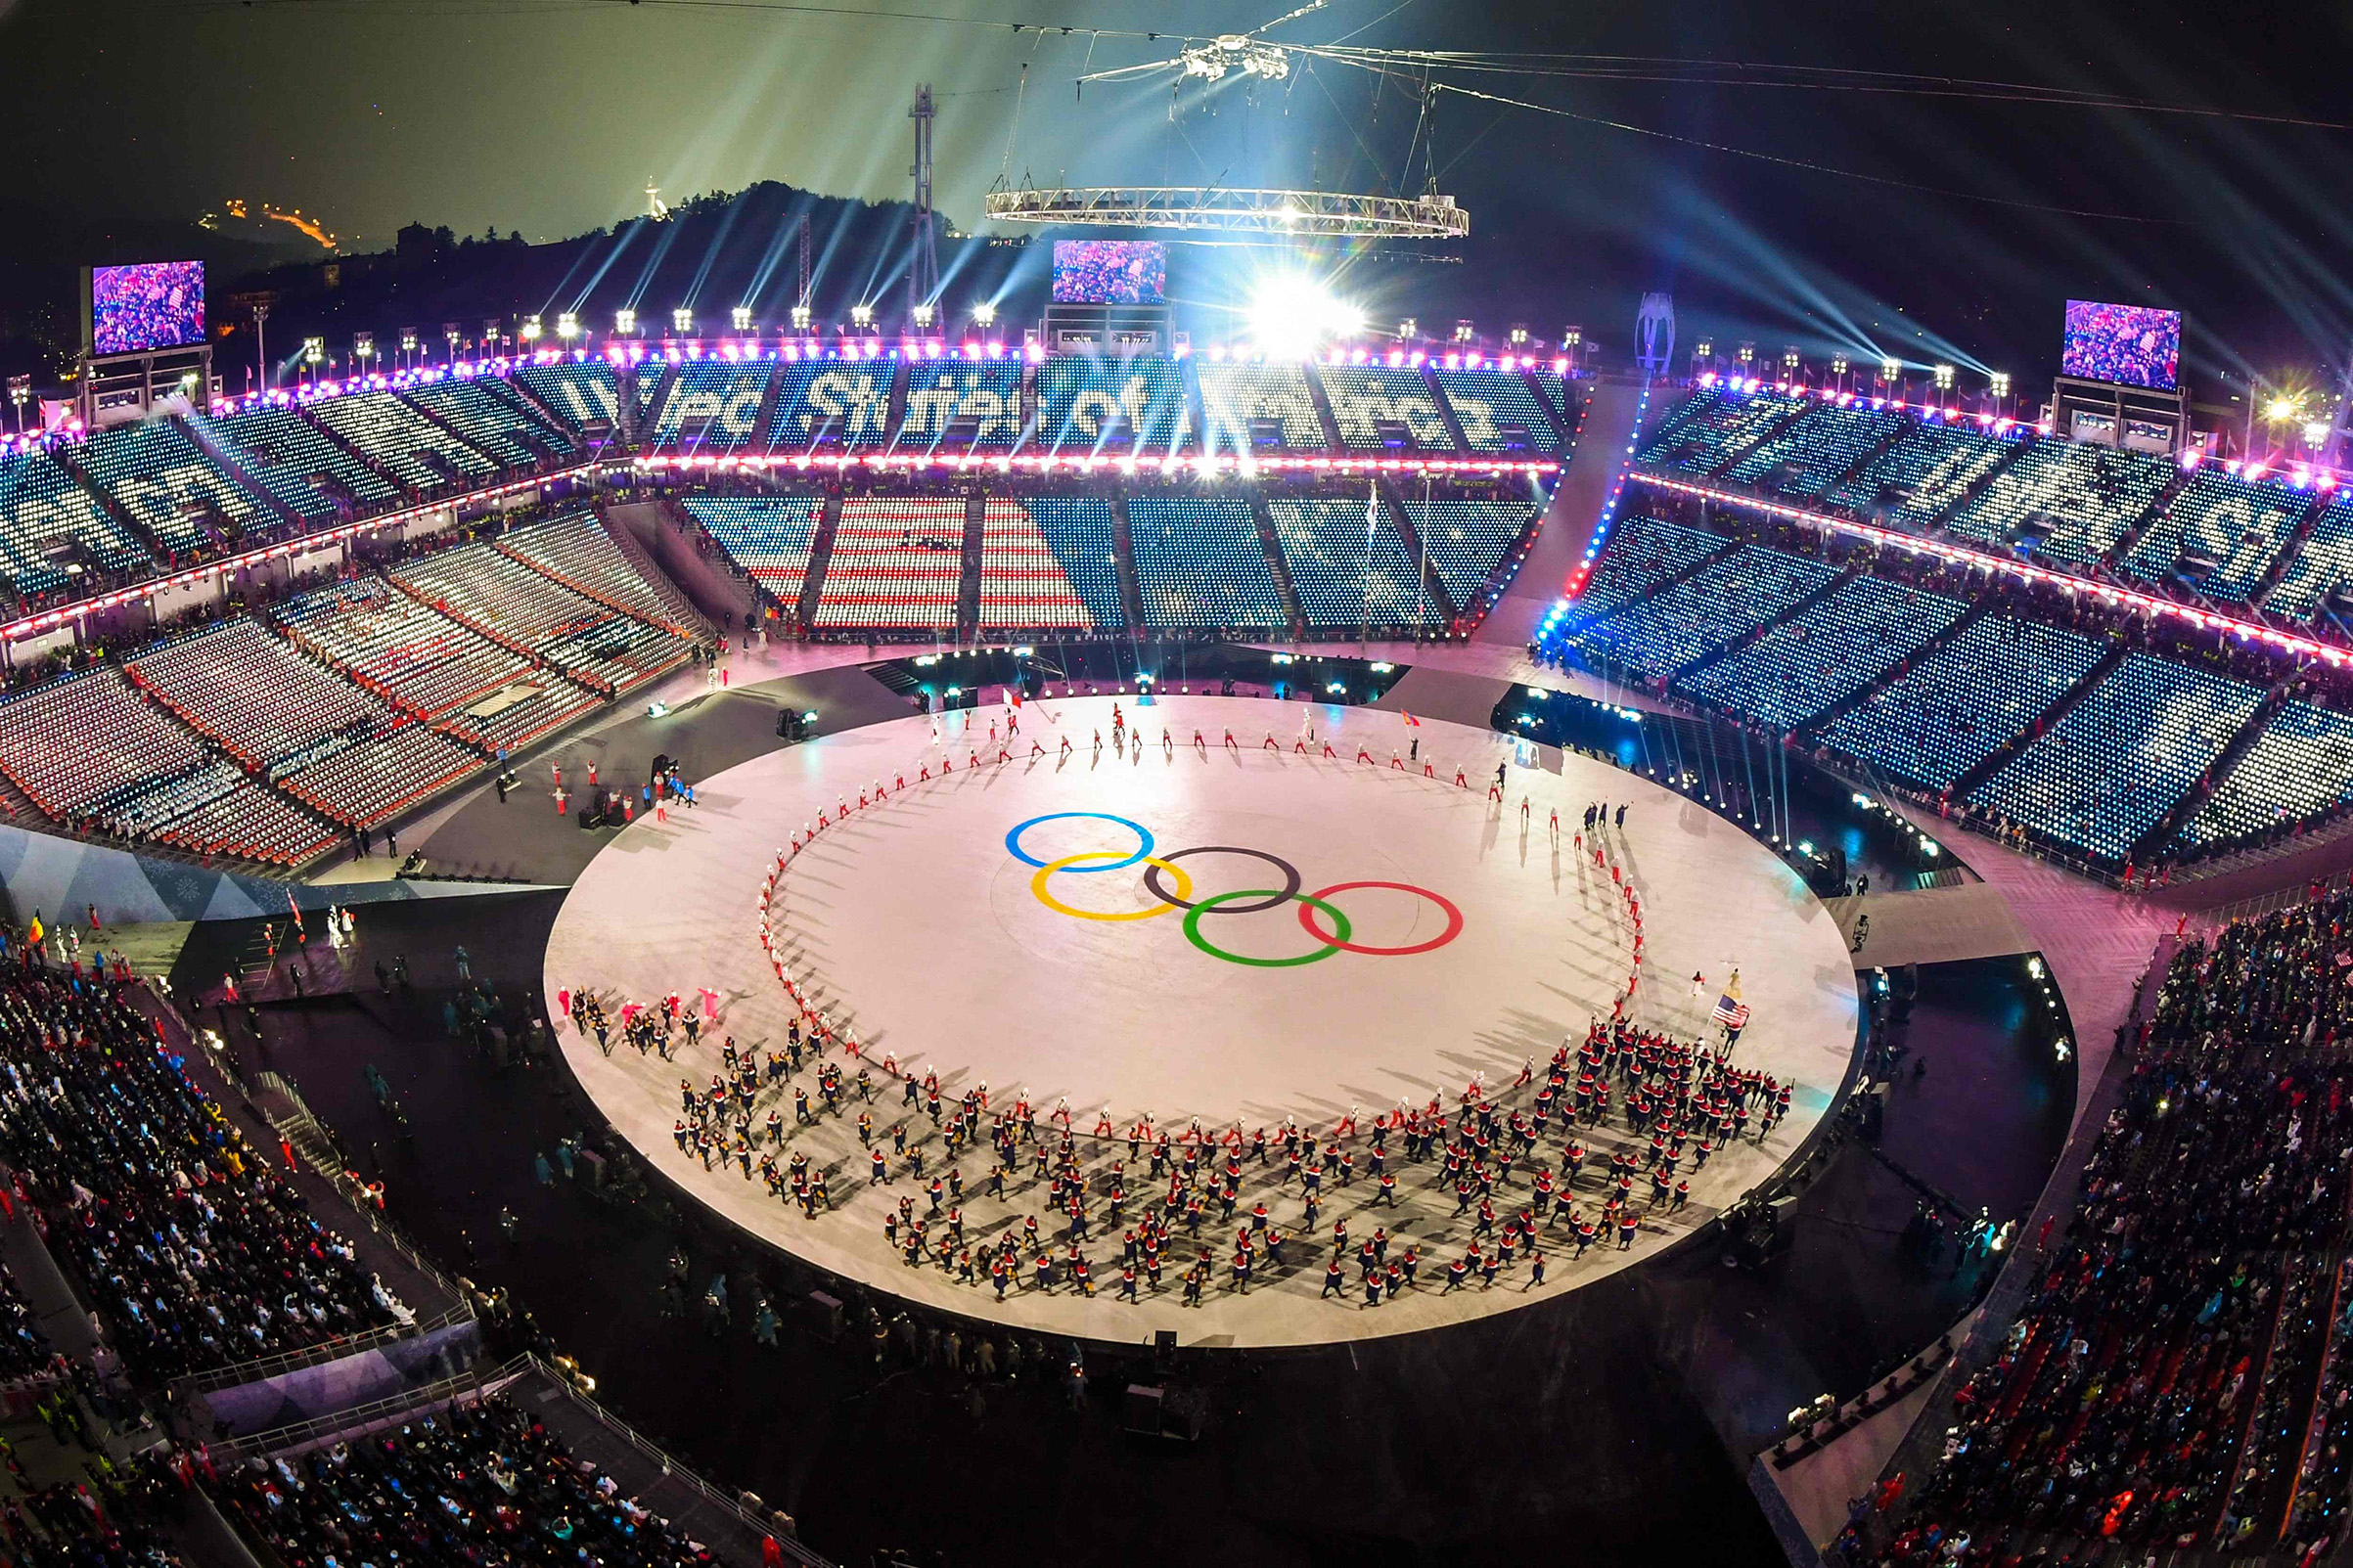 View of the Olympic rings during the opening ceremony of the Pyeongchang 2018 Winter Olympic Games.